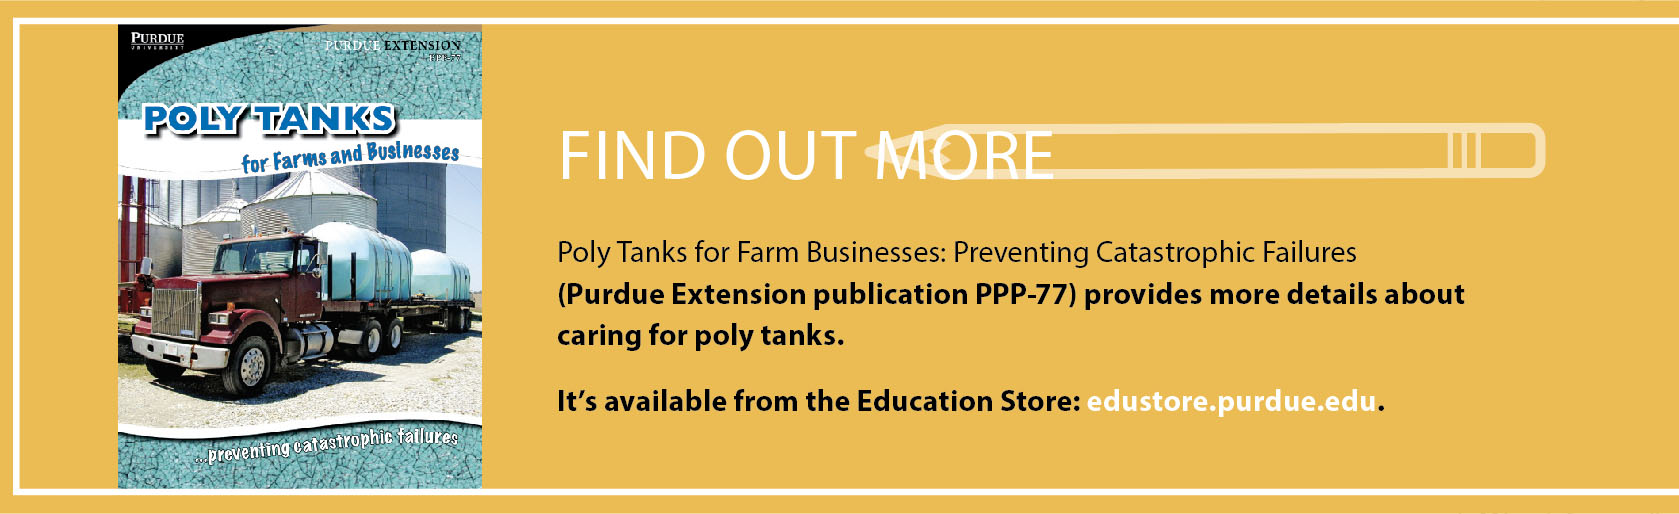 Poly-tank-find-out-more